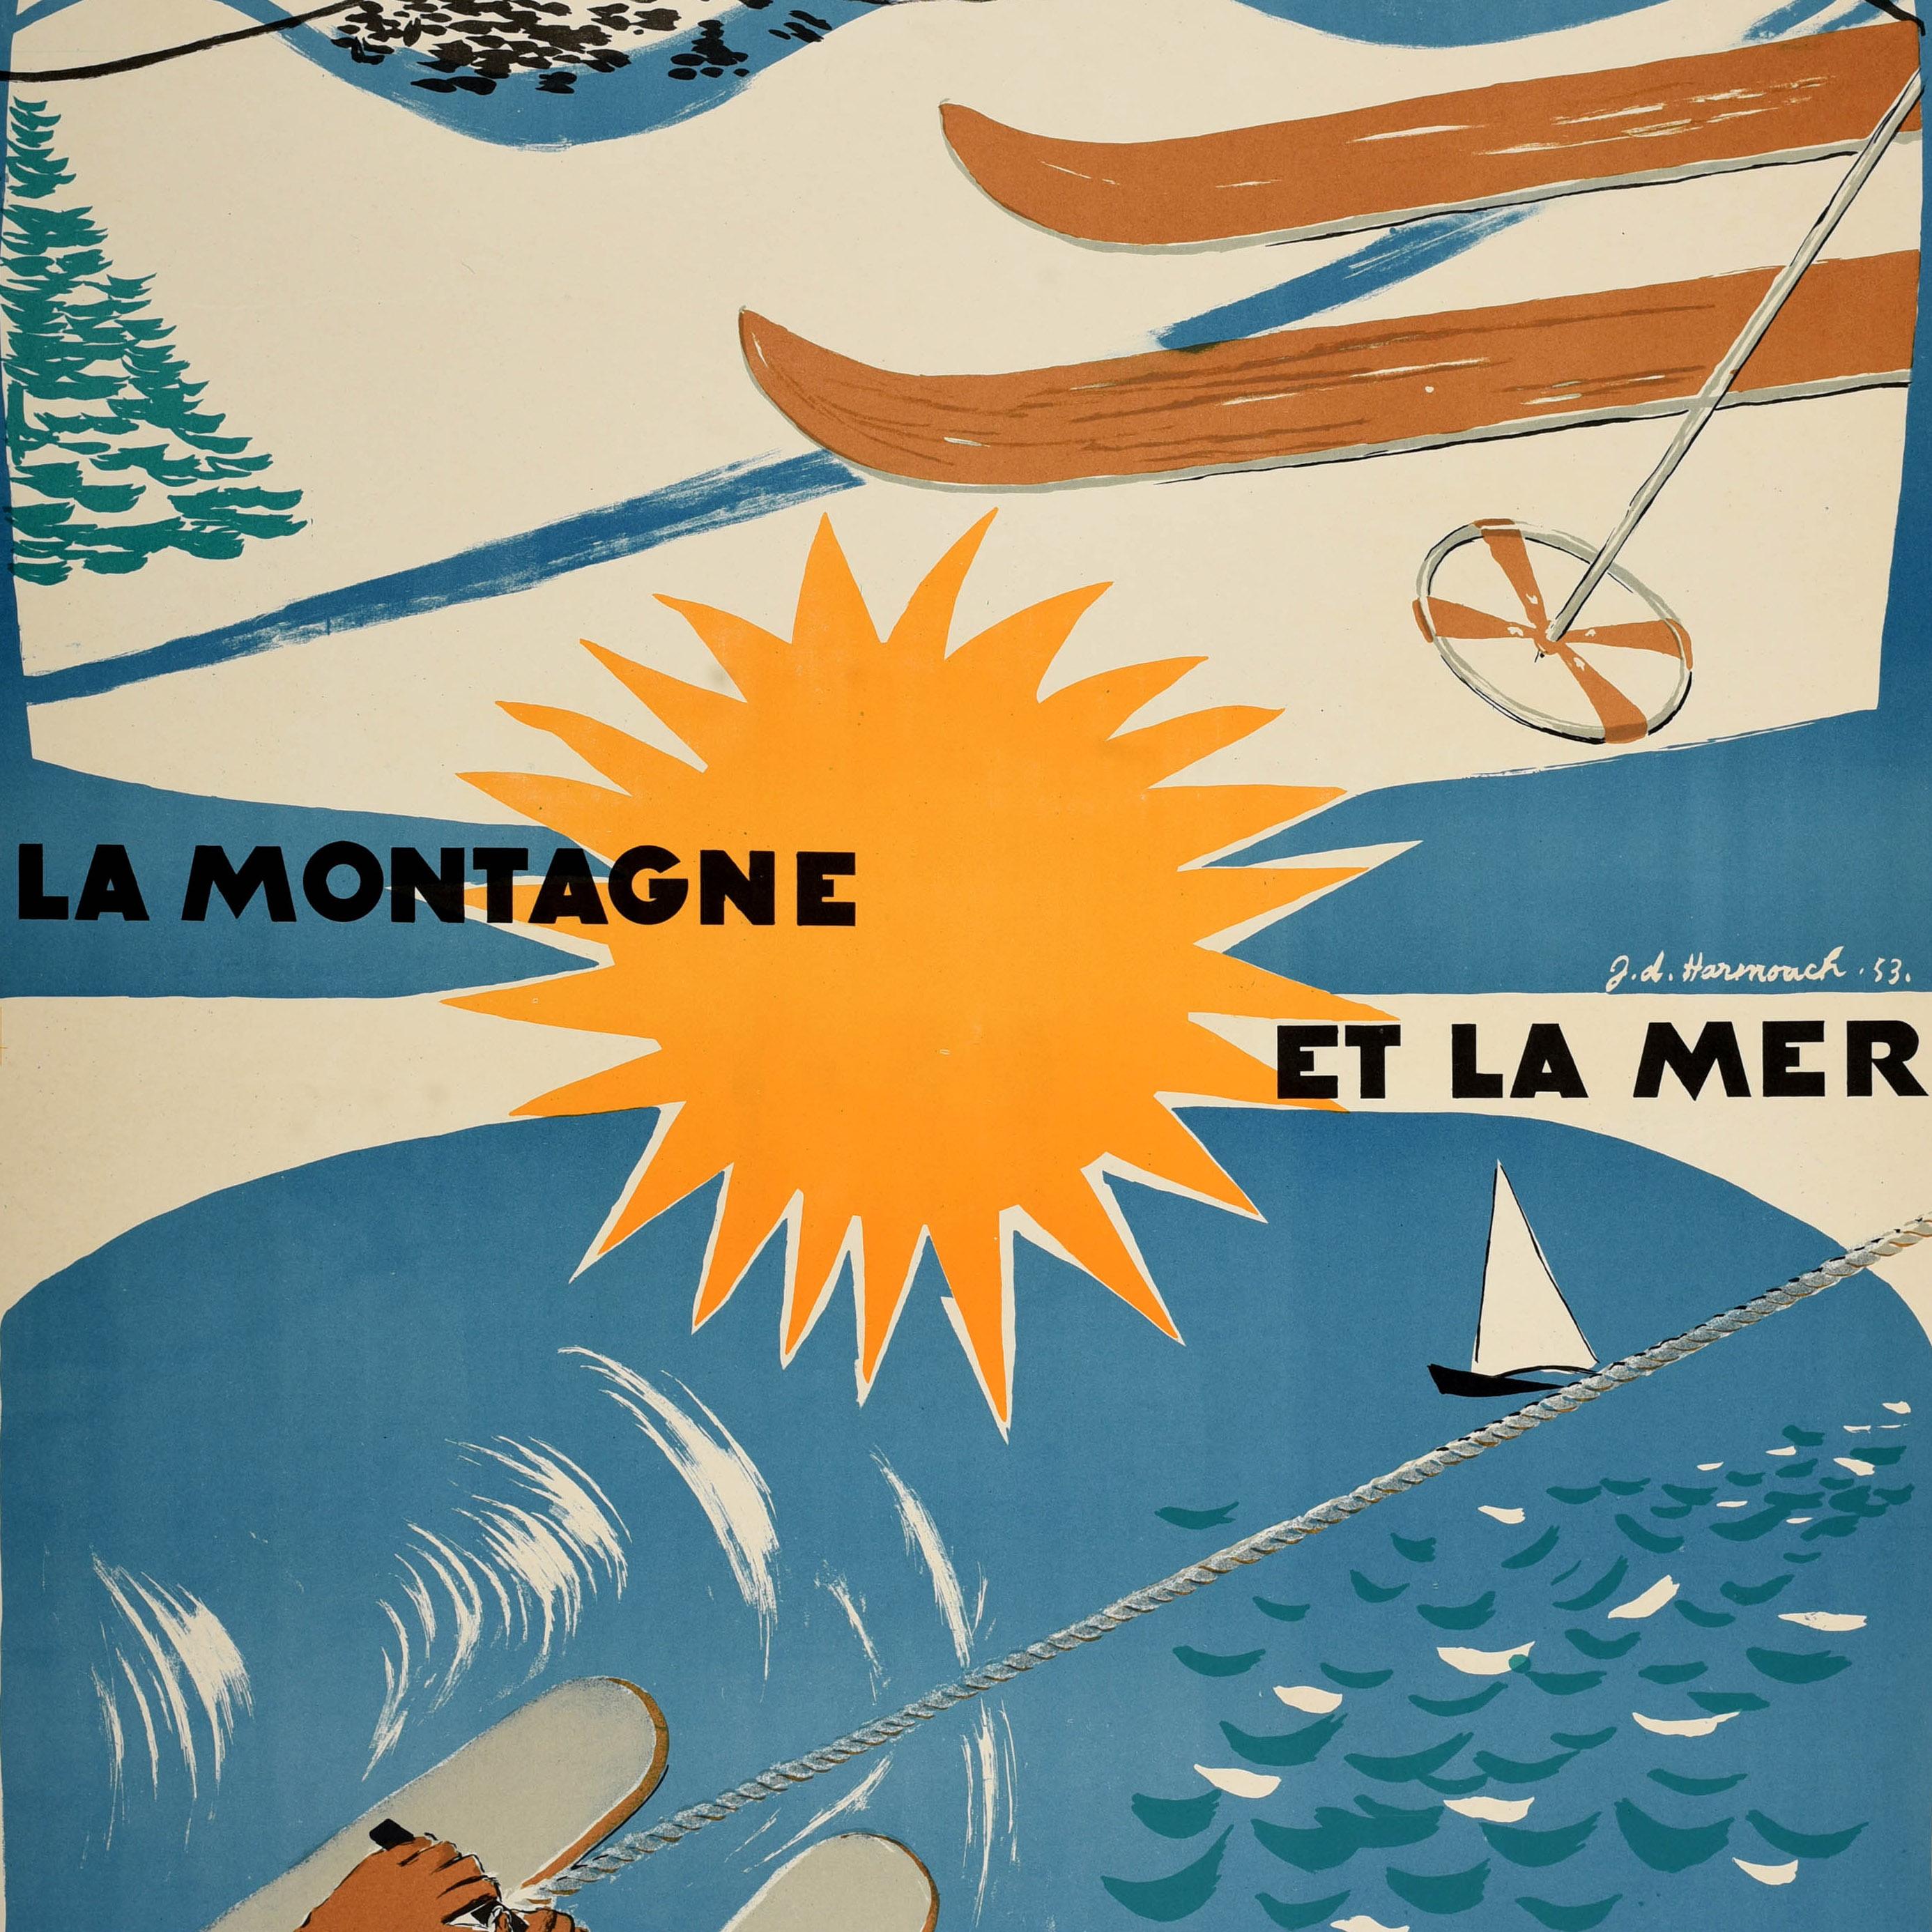 Original vintage Middle East travel poster - Au Liban La Montagne et la Mer avec le Soleil / In Lebanon The Mountain and the Sea with the Sun - featuring two sport illustrations of winter skiing and summer watersports on blue backgrounds depicting a